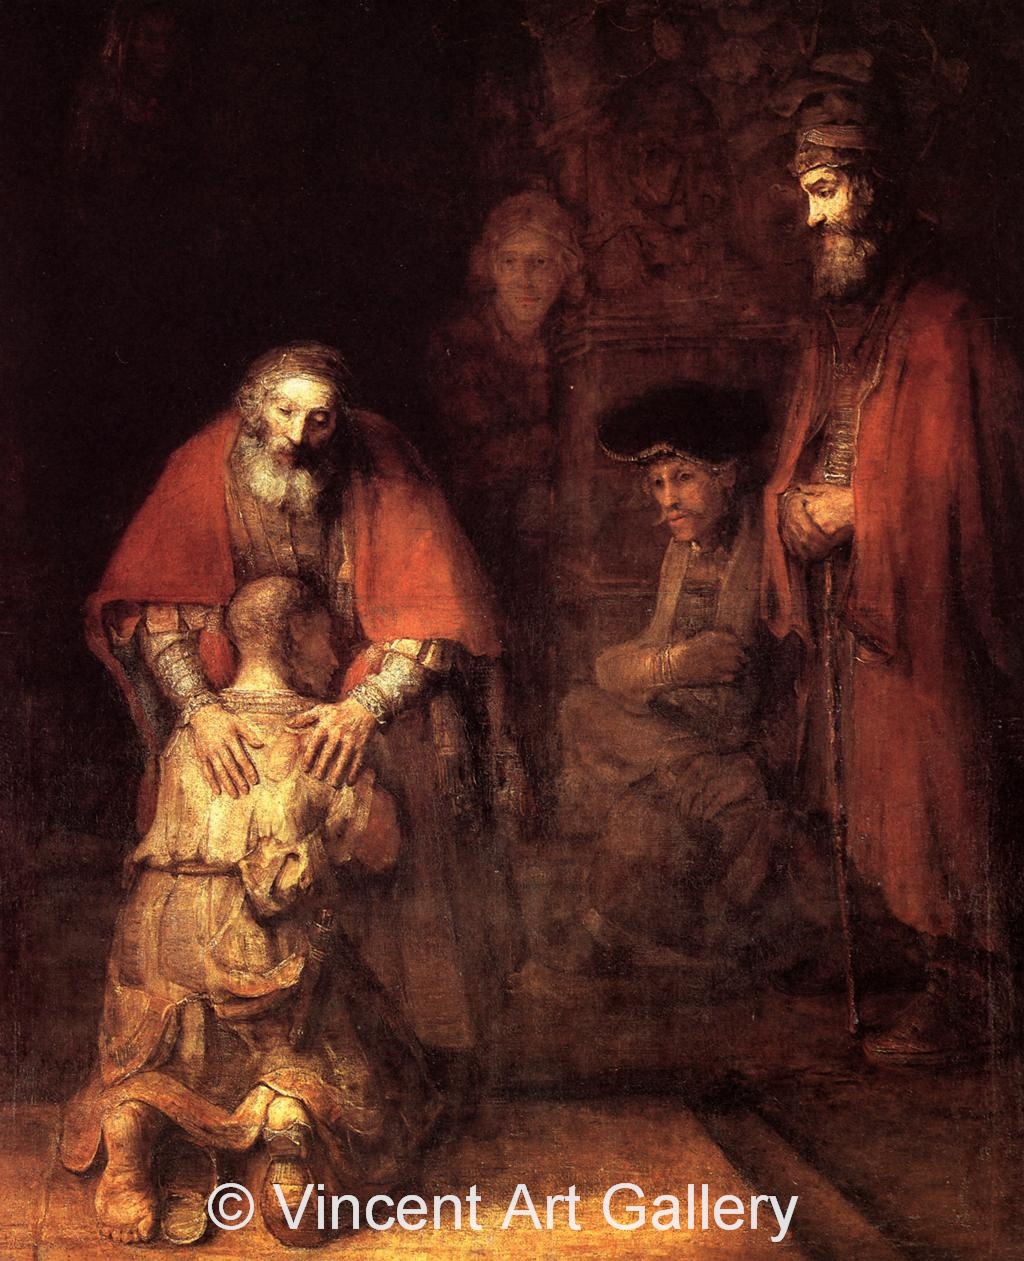 A740, REMBRANDT, Return off the Prodigal Son